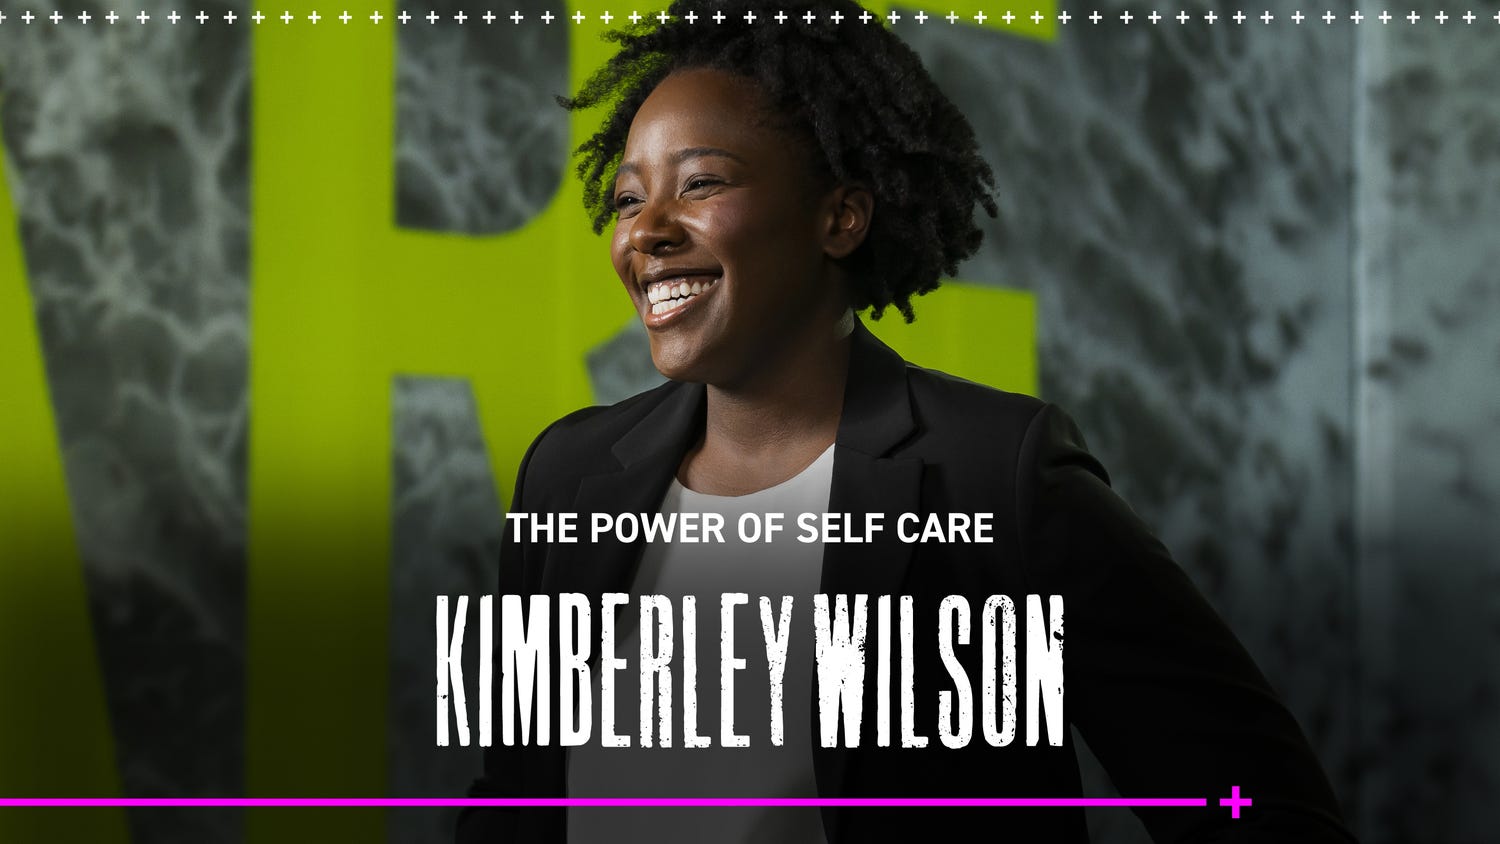 a thumbnail showing kimberley wilson smiling while wearing a suit